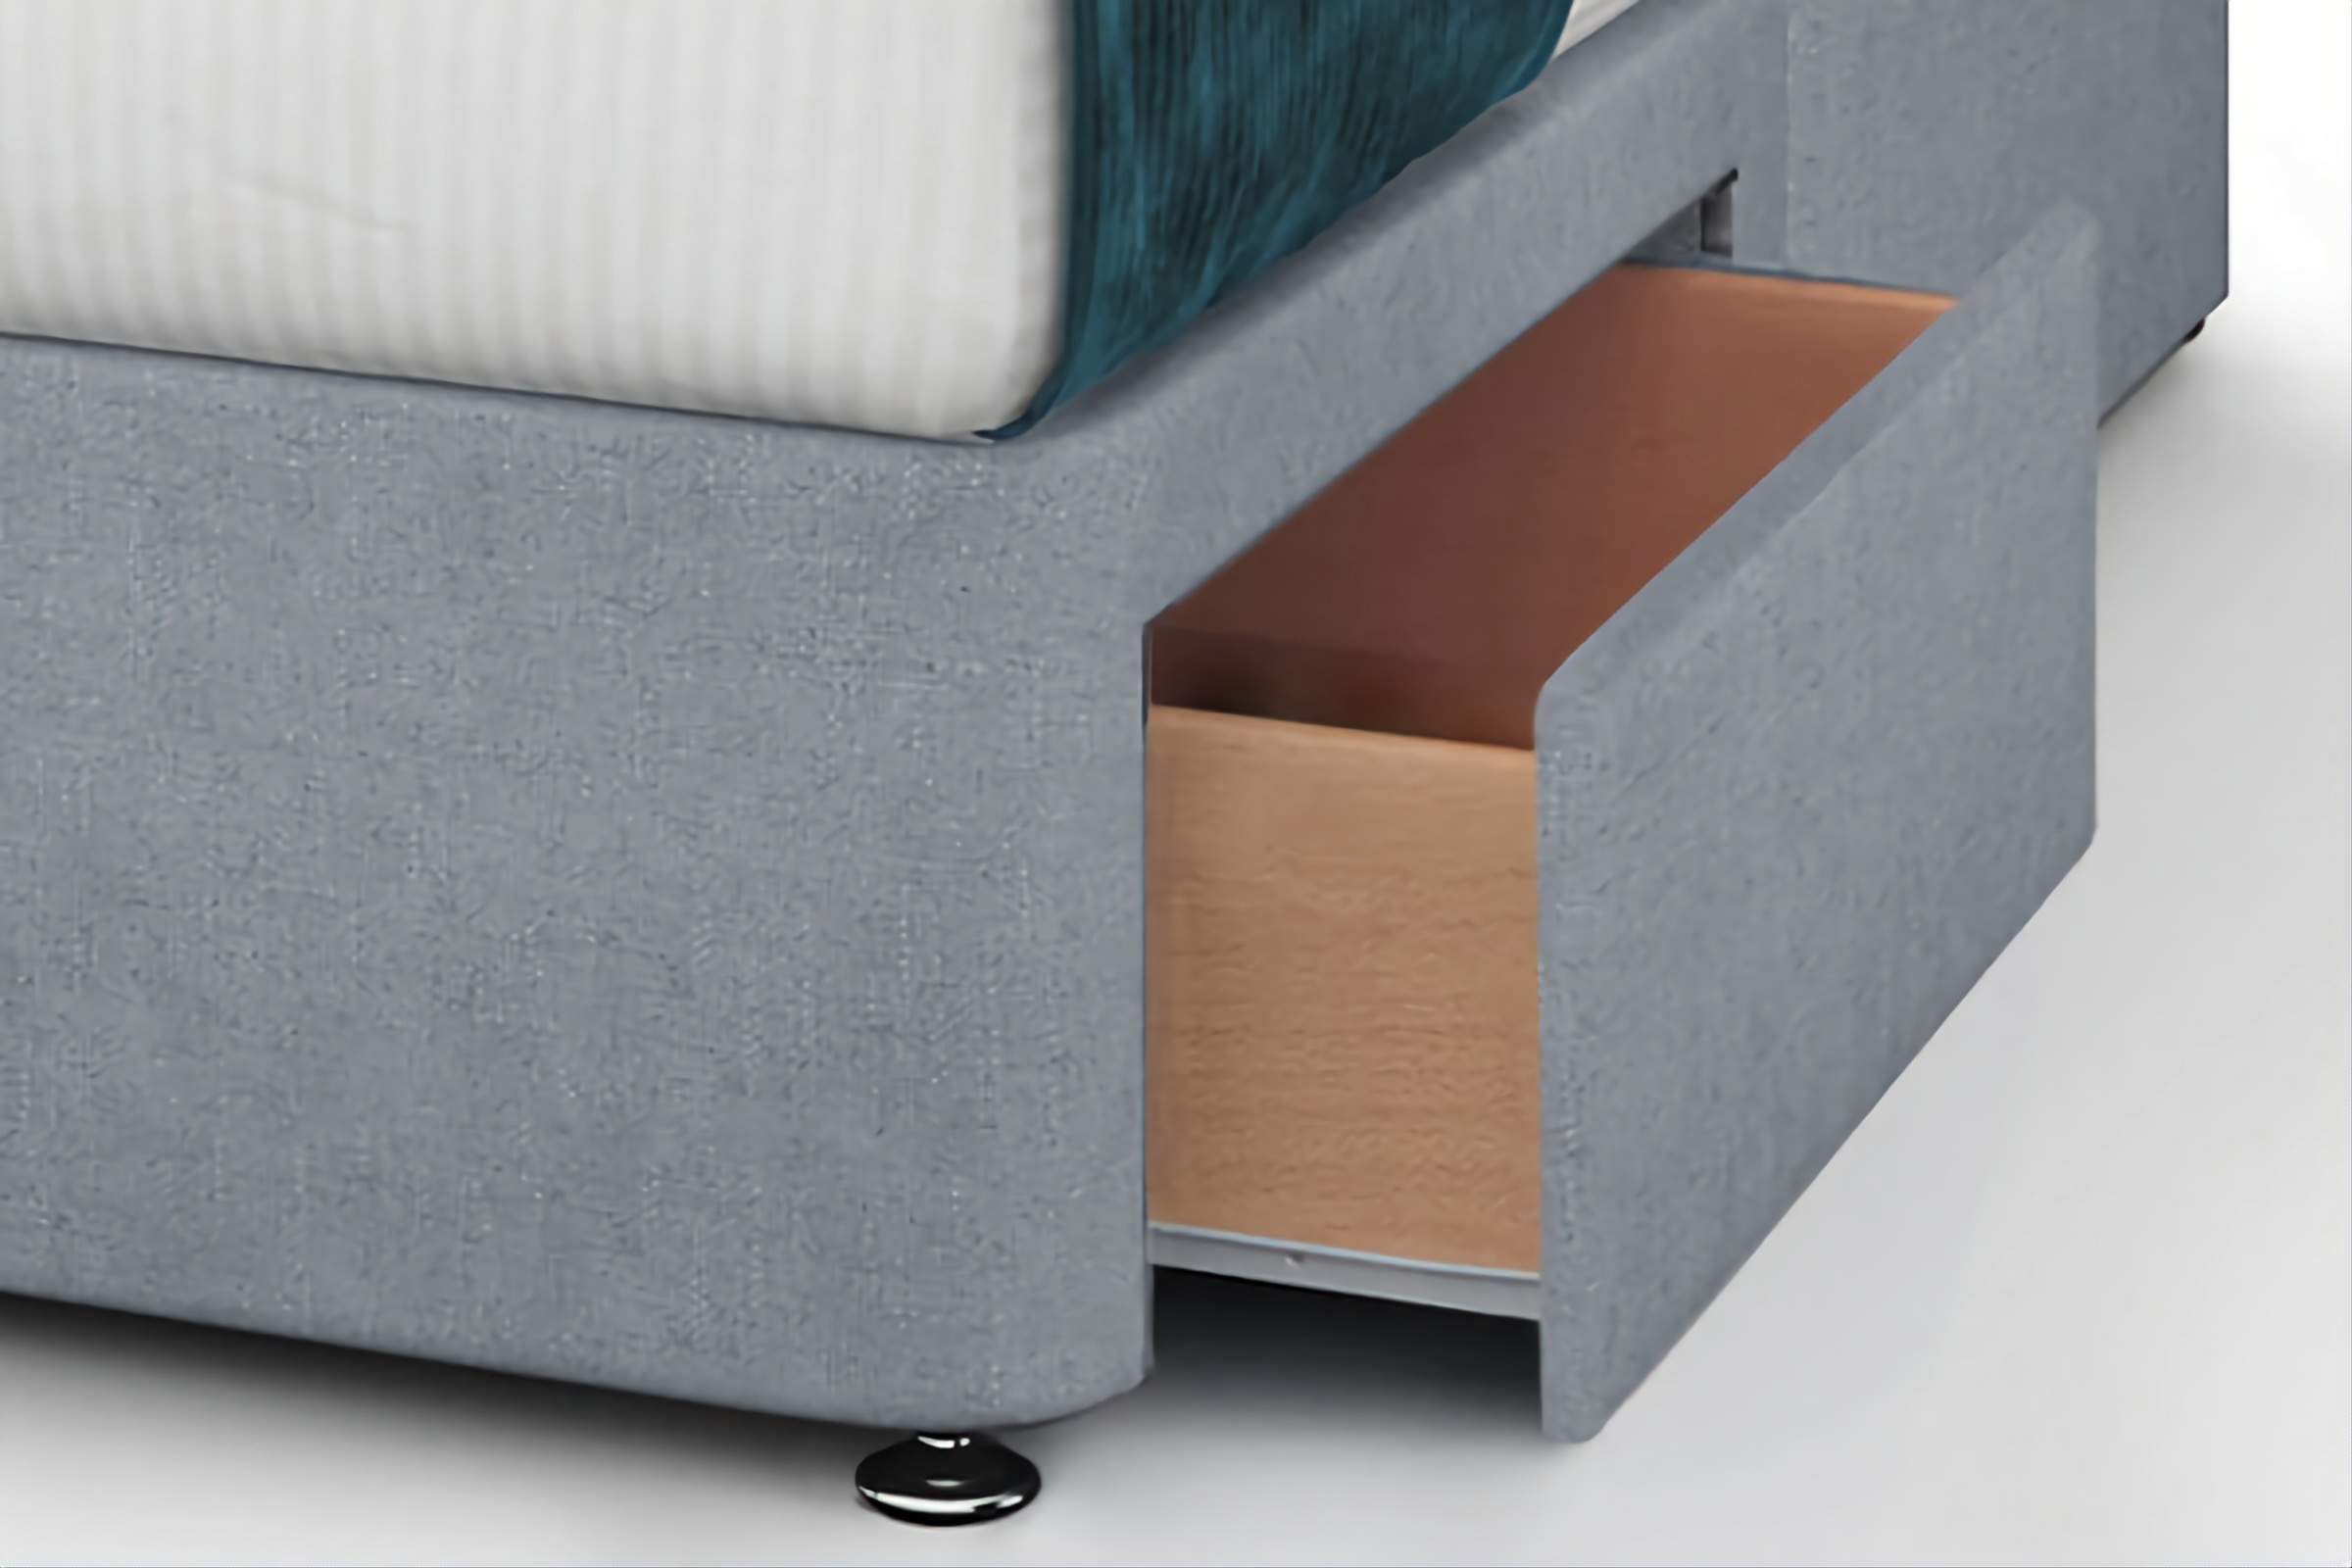 Drawers and Sliders for 'Divan' Beds